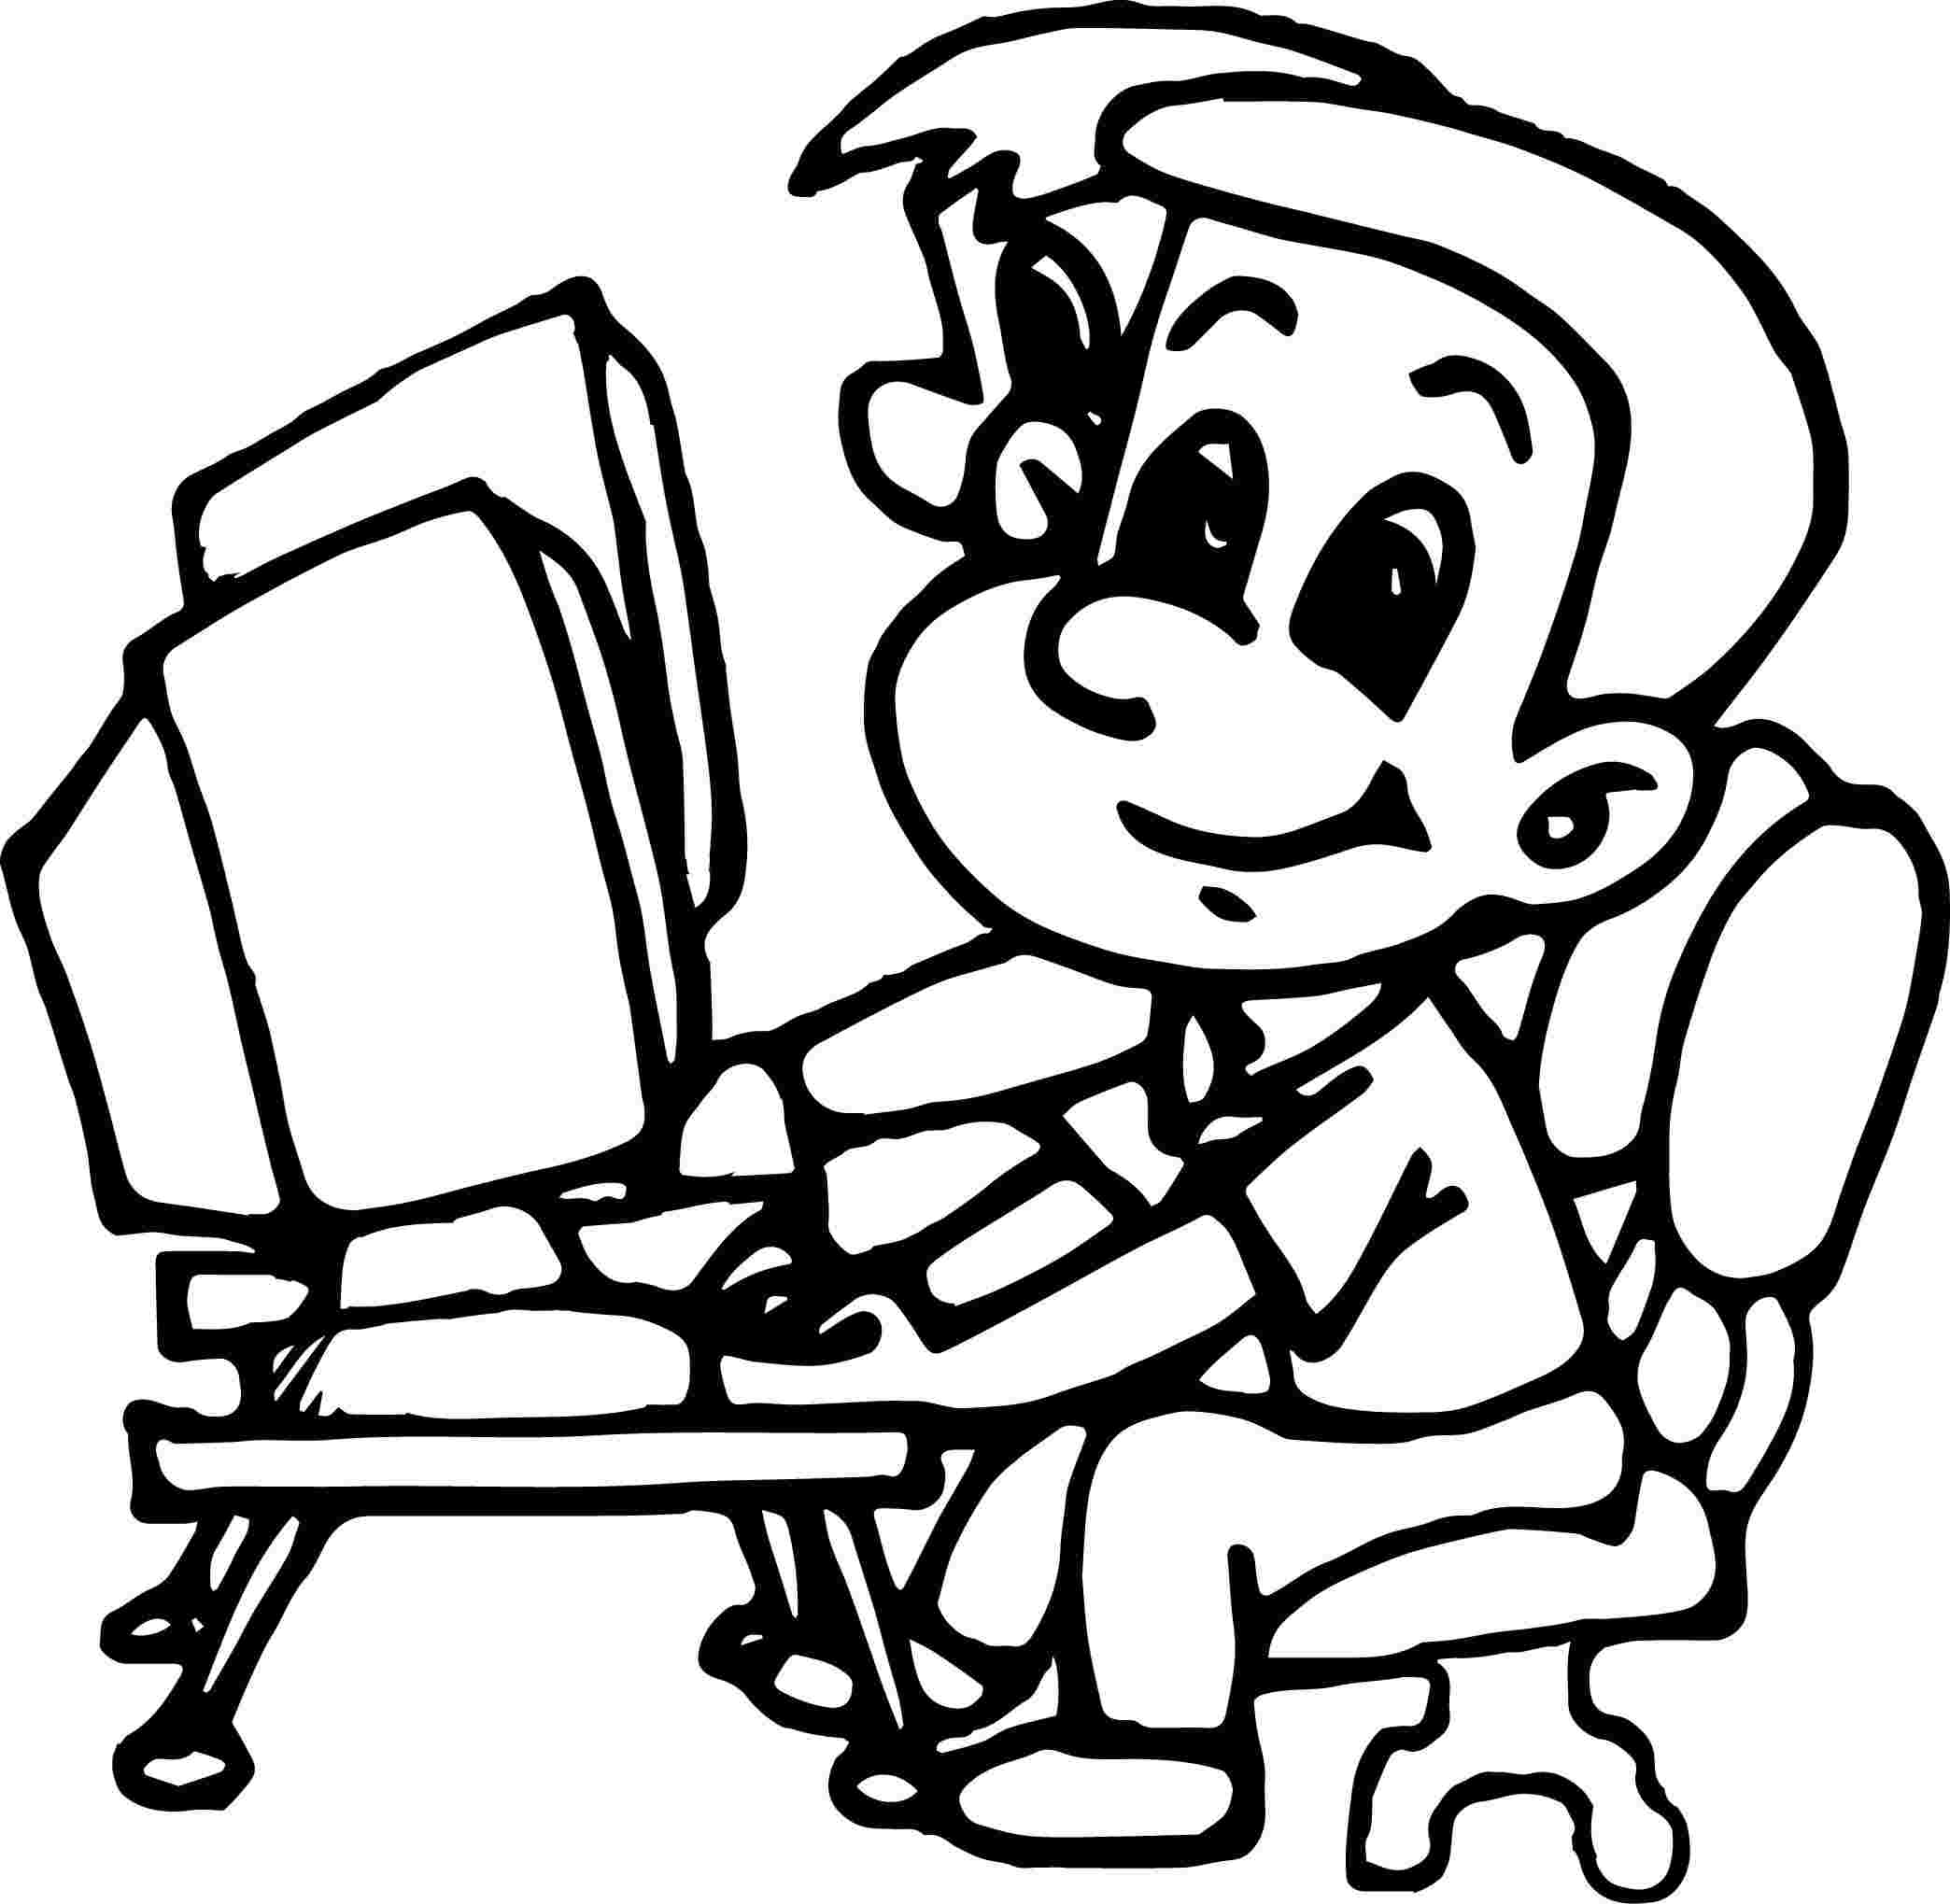 Computer parts coloring pages